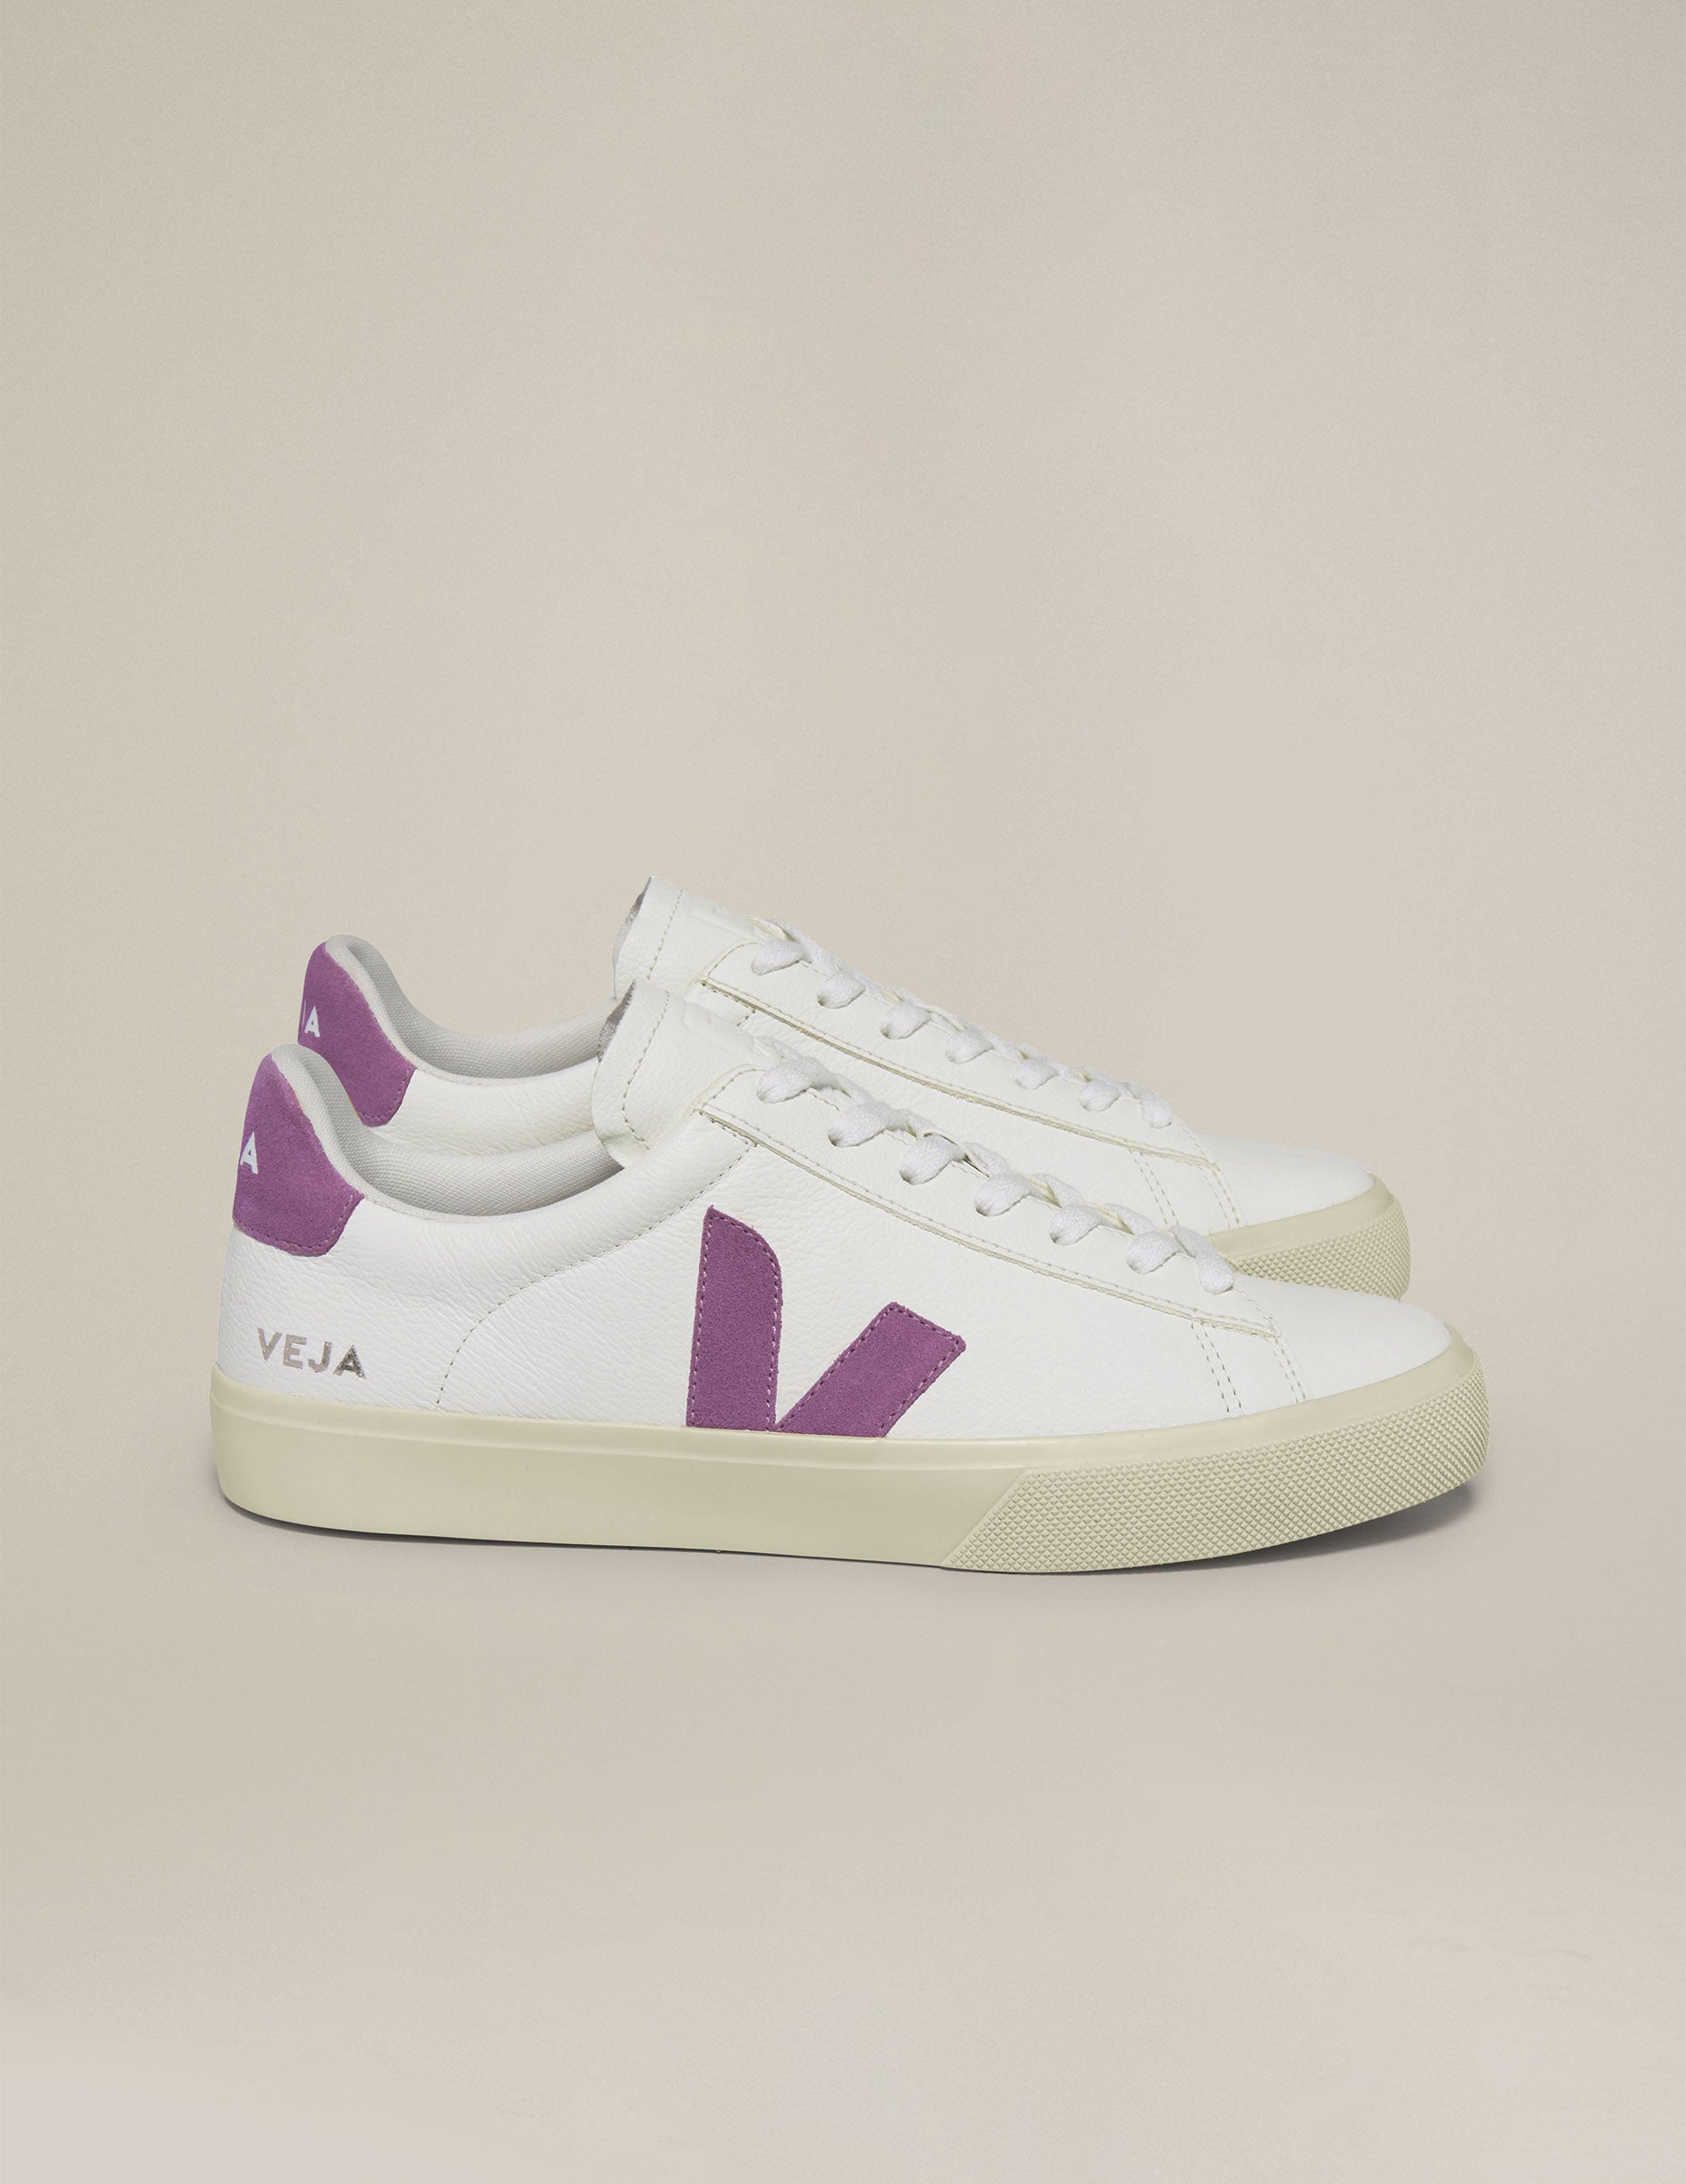 white and purple Veja sneakers.